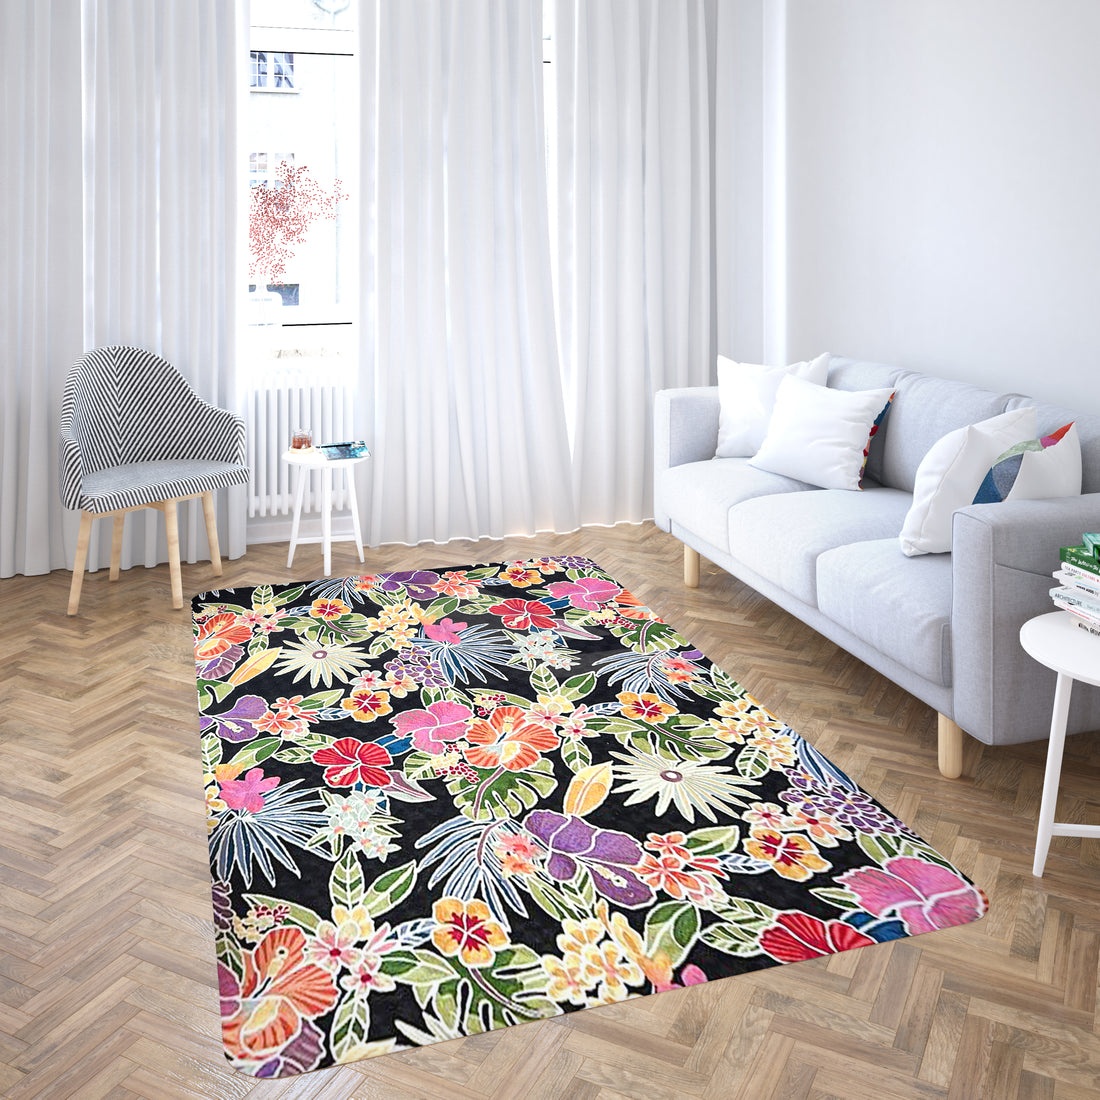 Black Floral Crewel Wool Chainstitch Rugs